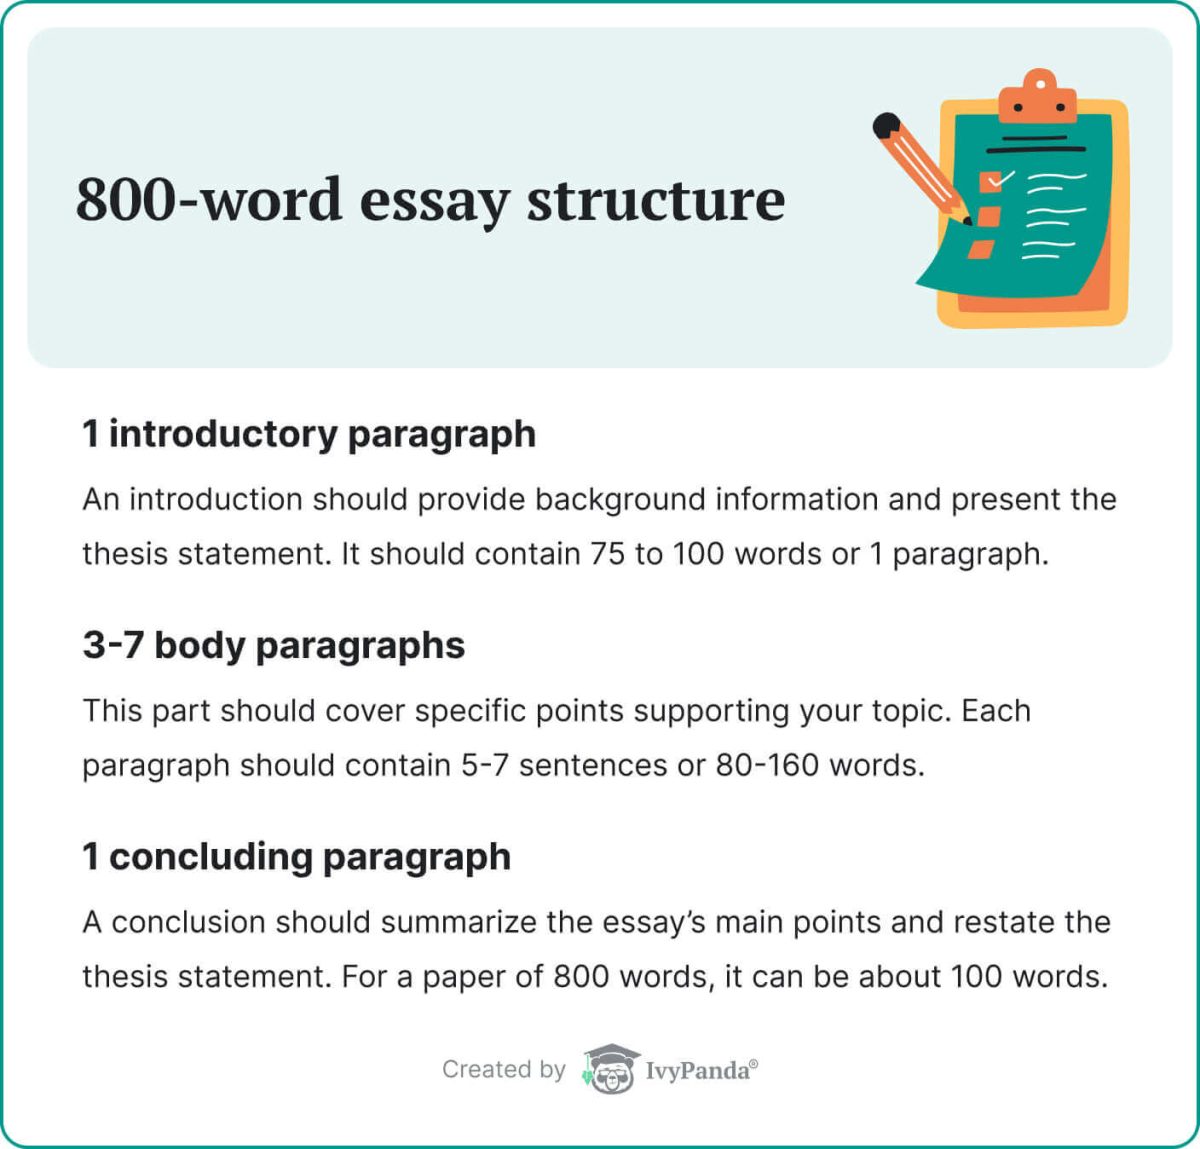 This image shows the 800-word essay structure.